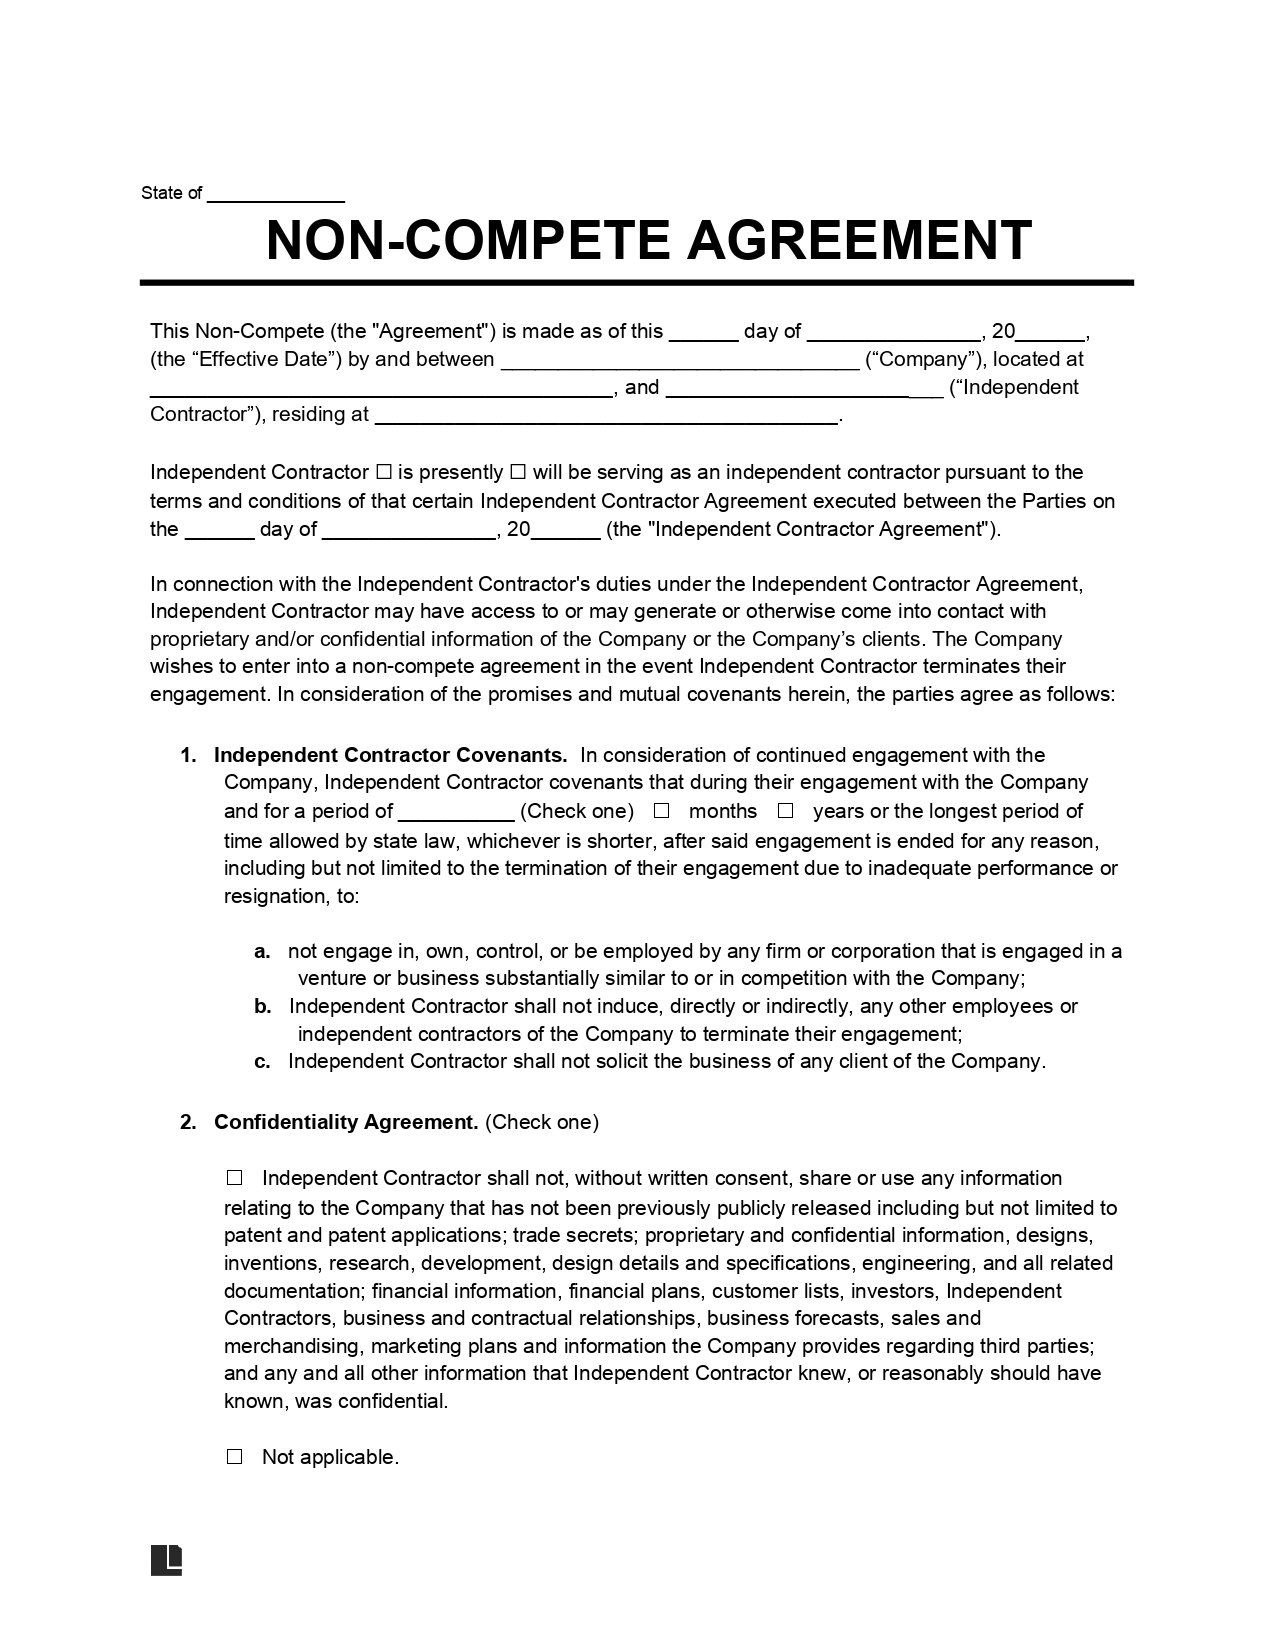 Independent Contractor Non-Compete Agreement Sample